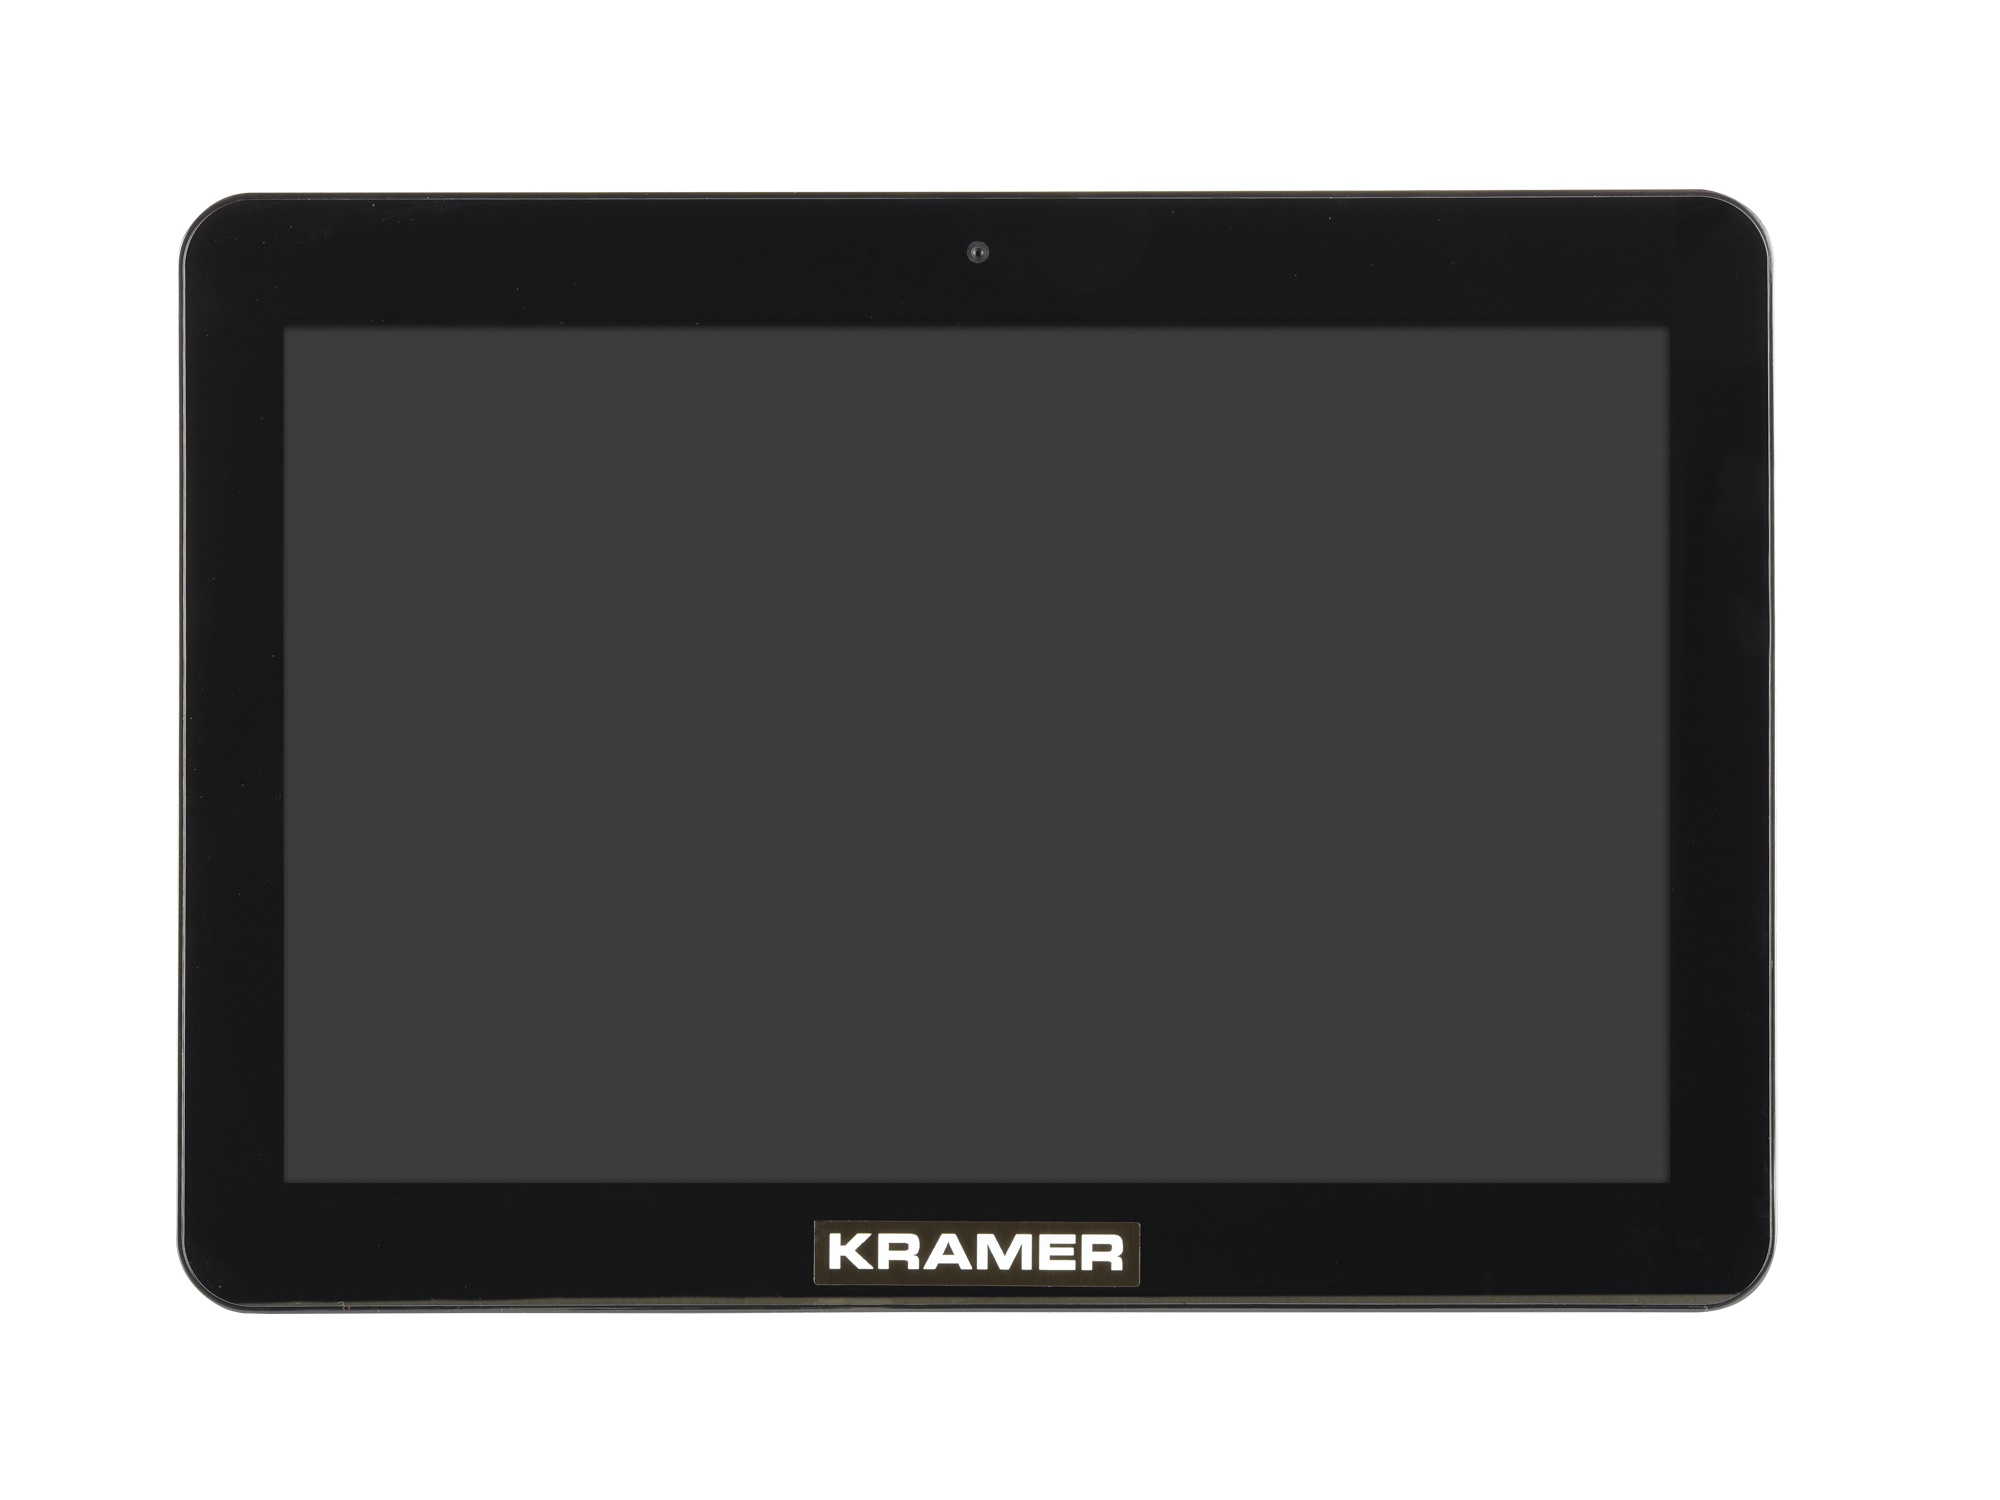 Kramer KT-1010 10-Inch Wall and Table Mount PoE Touch Panel